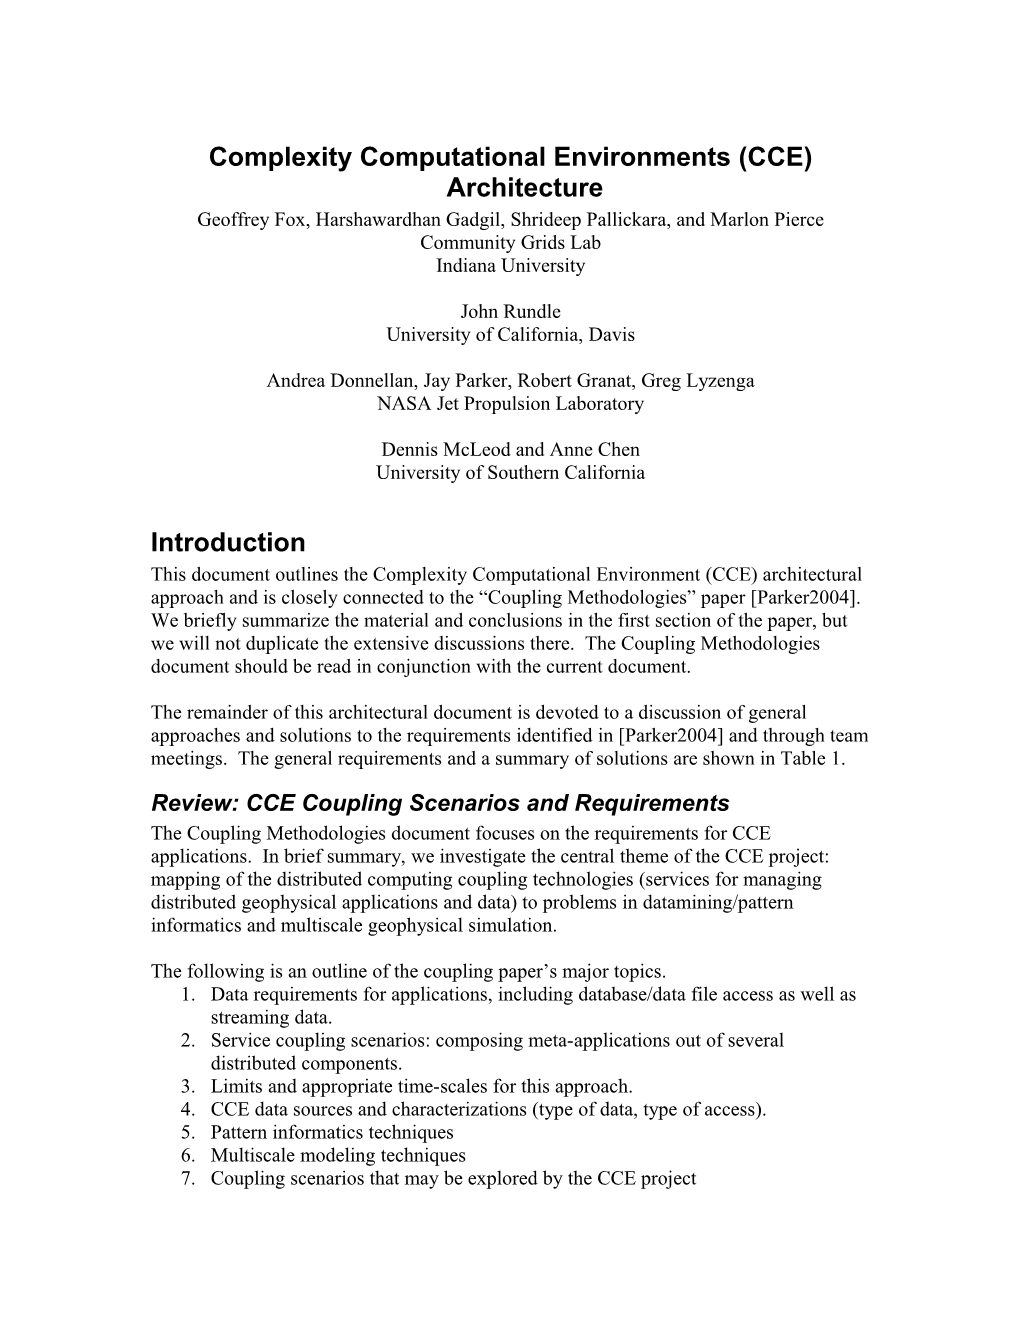 Complexity Computational Environments (CCE) Architecture Draft 0